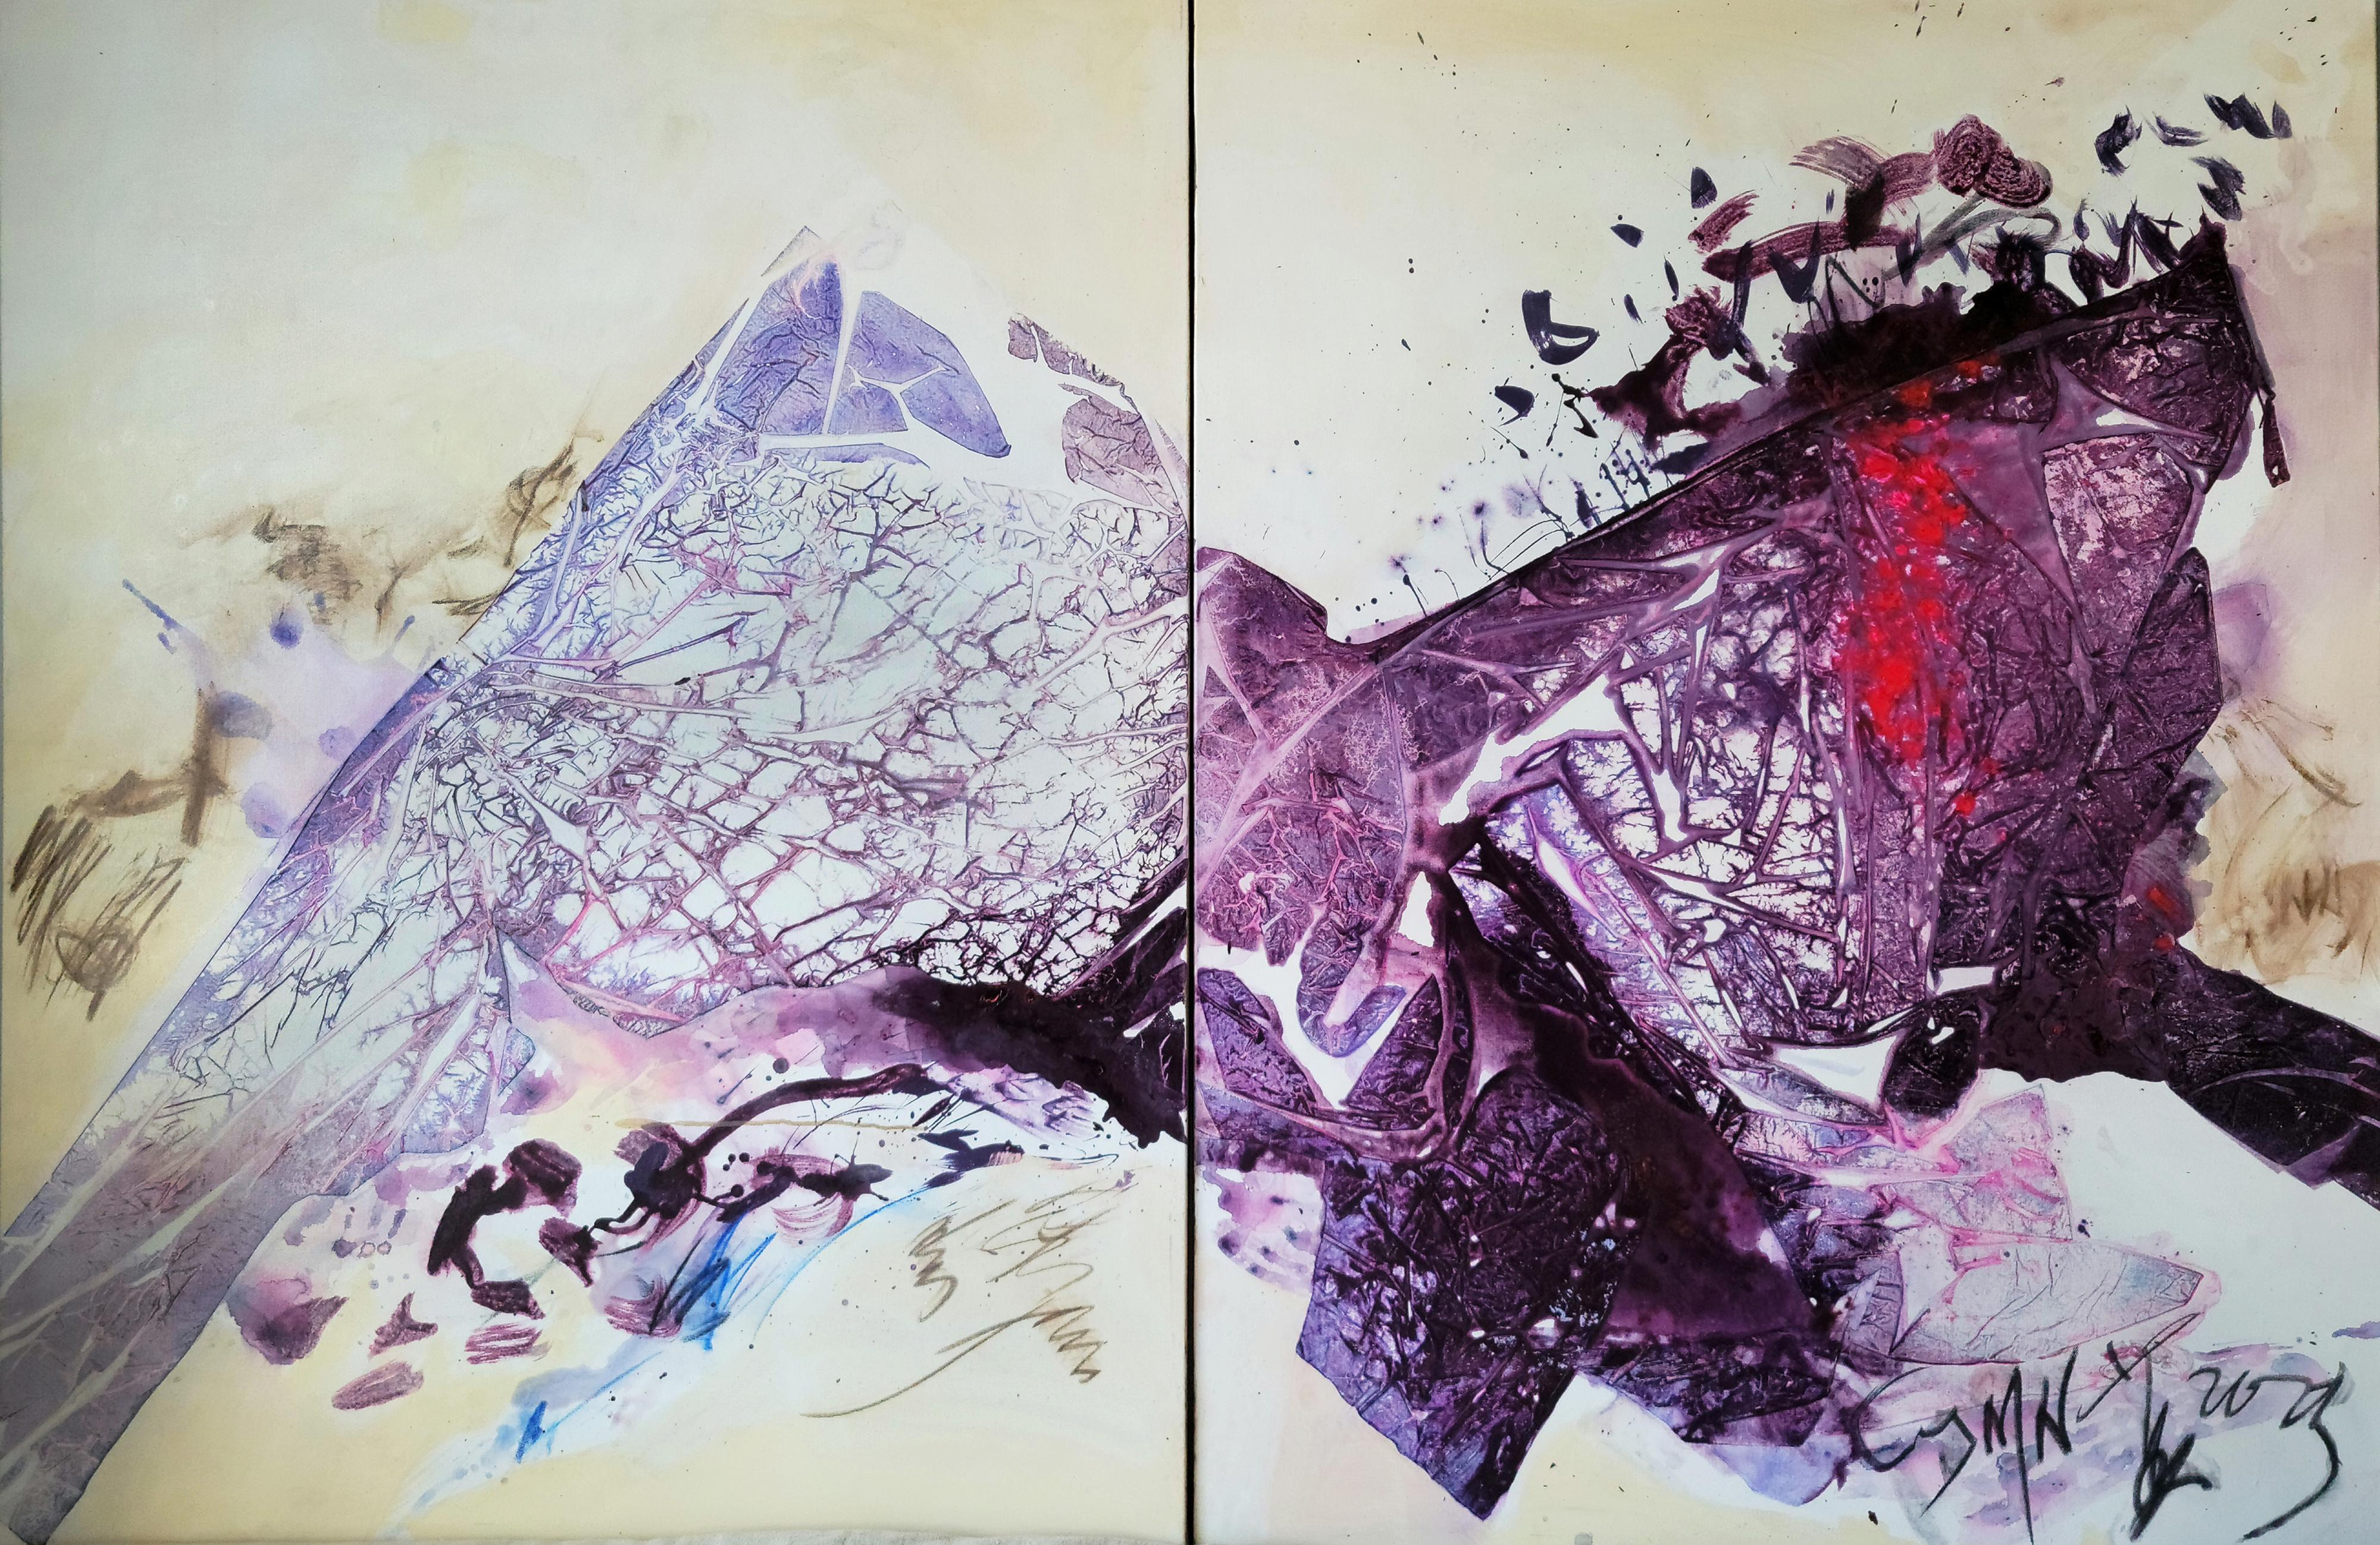 Synchronized Unity- Vivid, Gestural, Expressive Abstract and Zen Calligraphy - Painting by Cymn Wong 